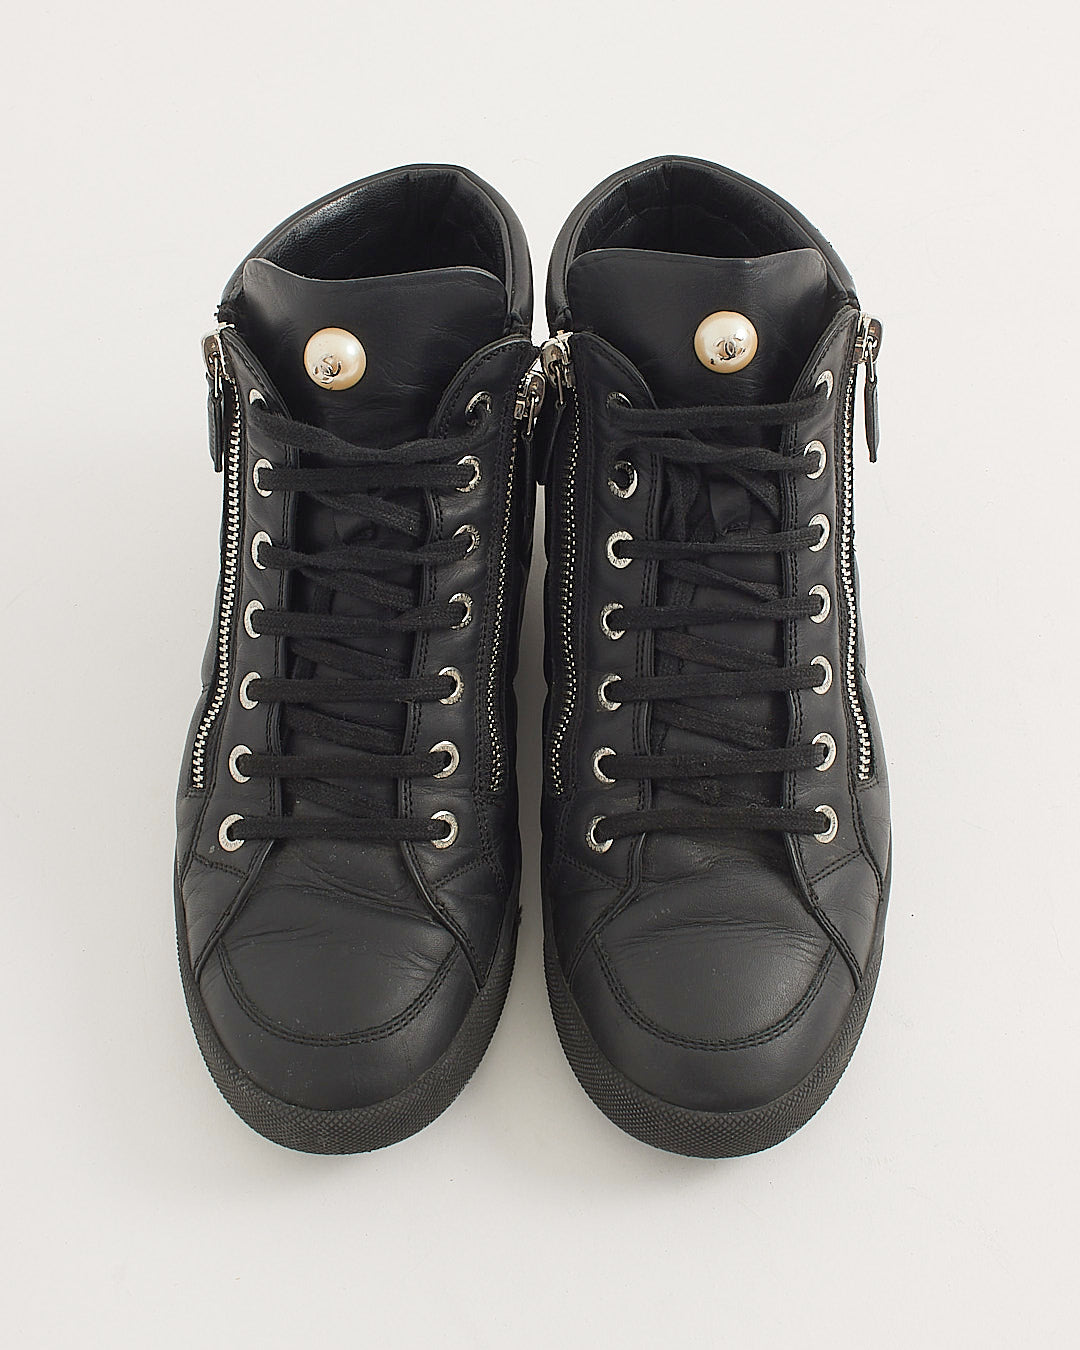 Chanel Black Leather Logo High-Top Sneakers - 38